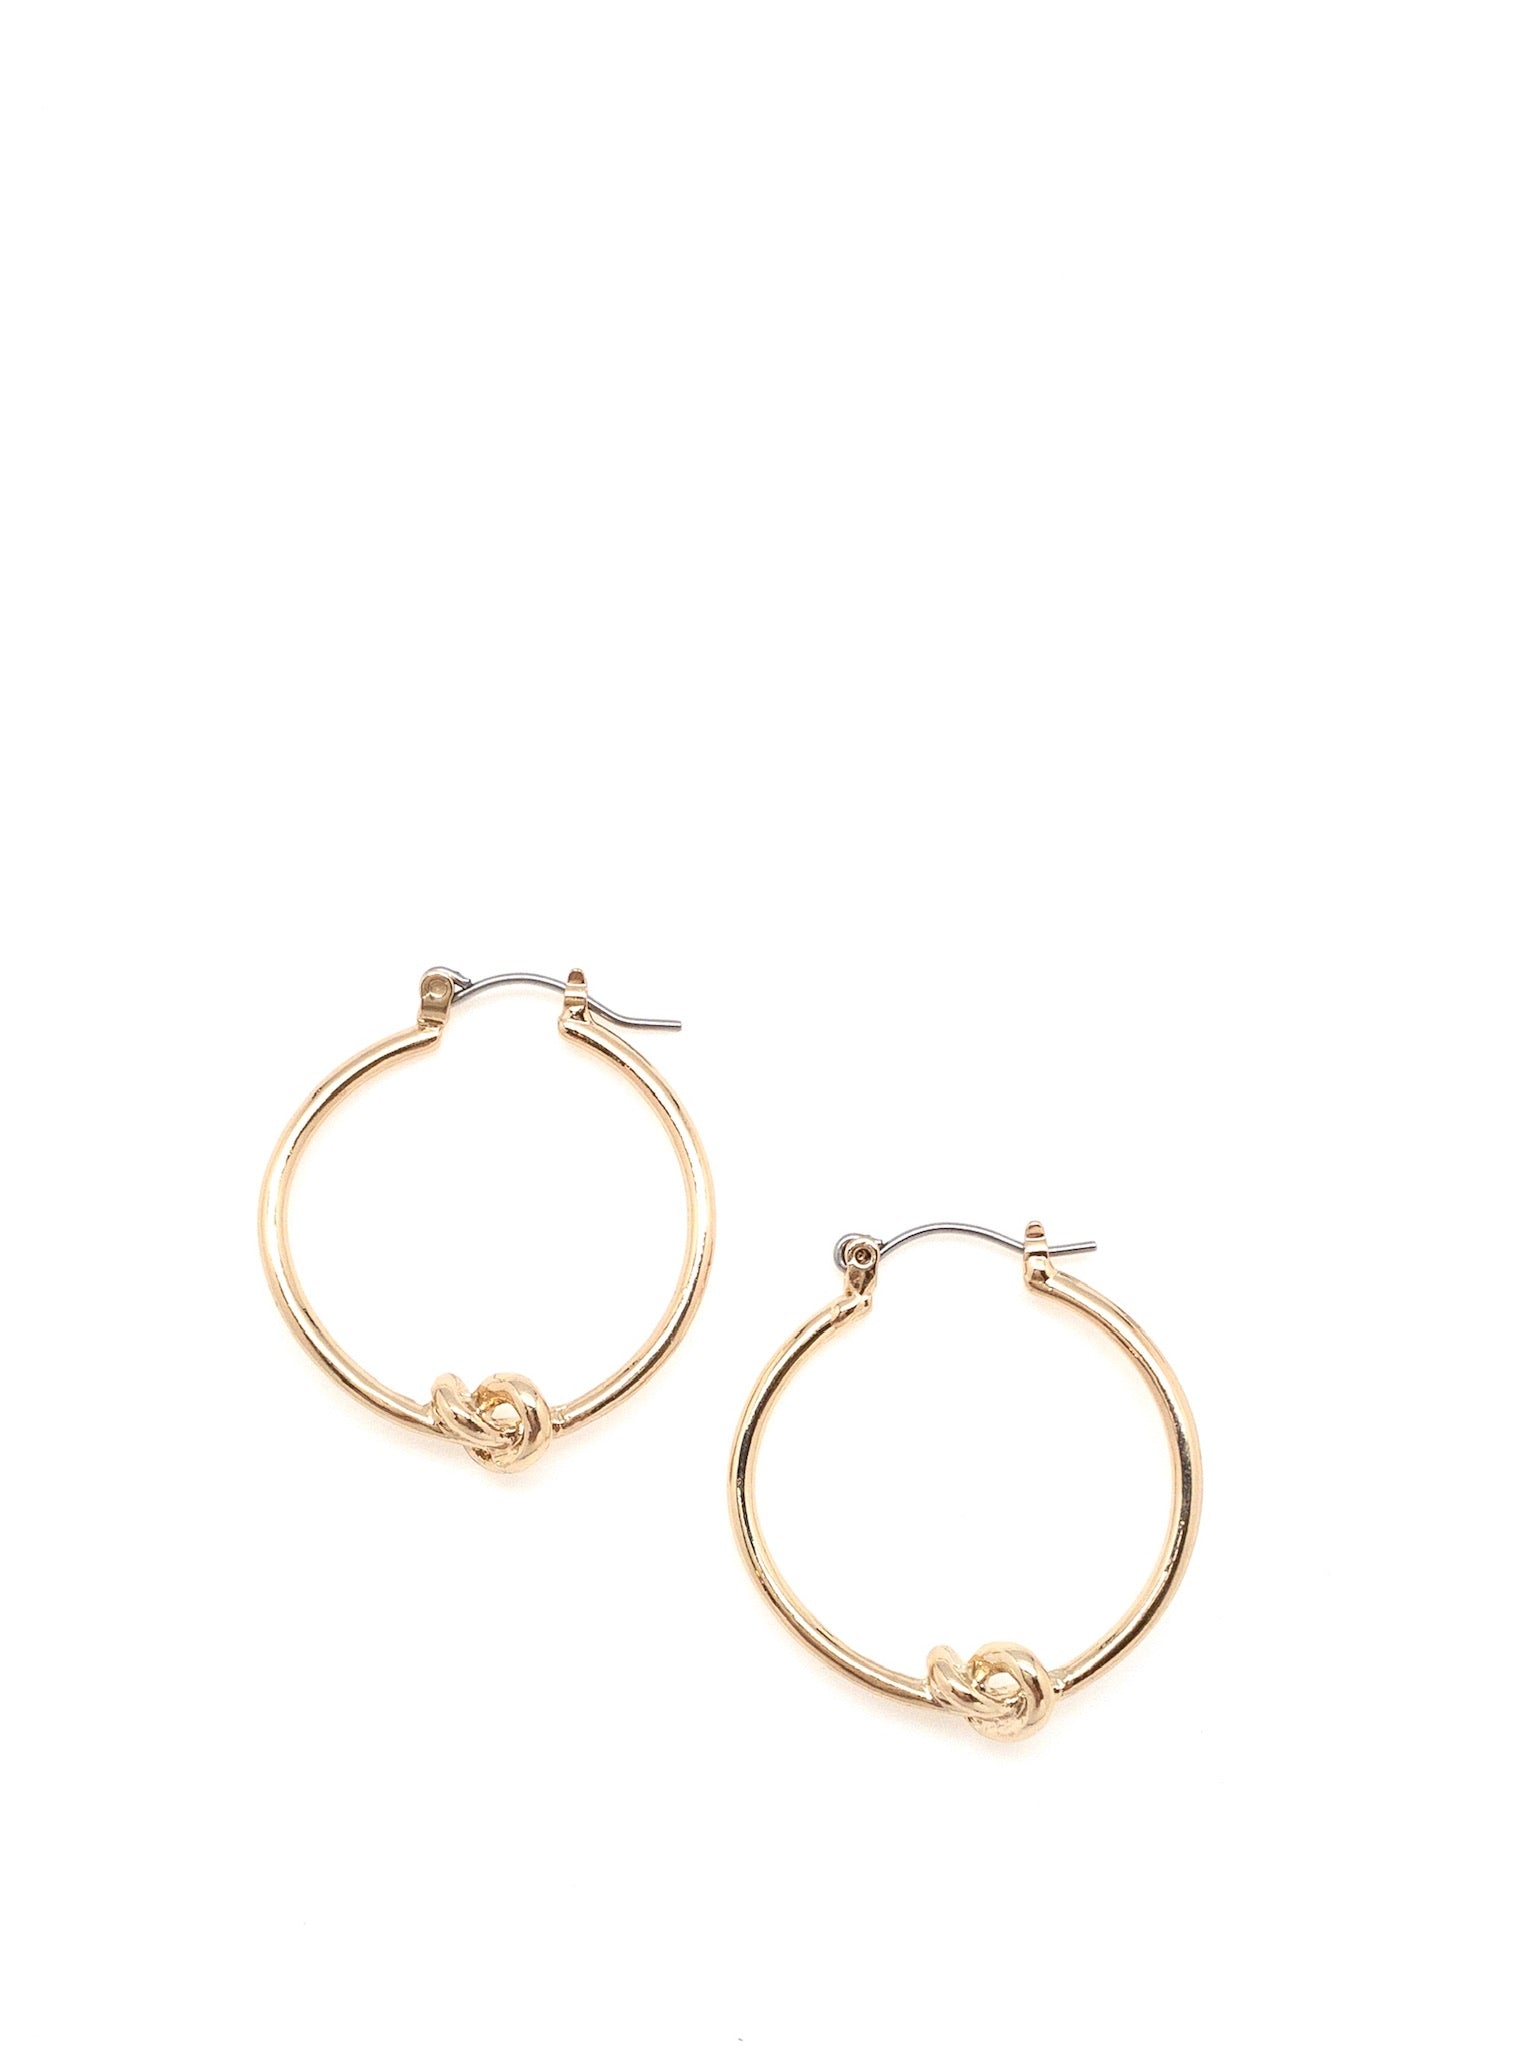 Gold hoop earrings with a knot detail in the bottom center